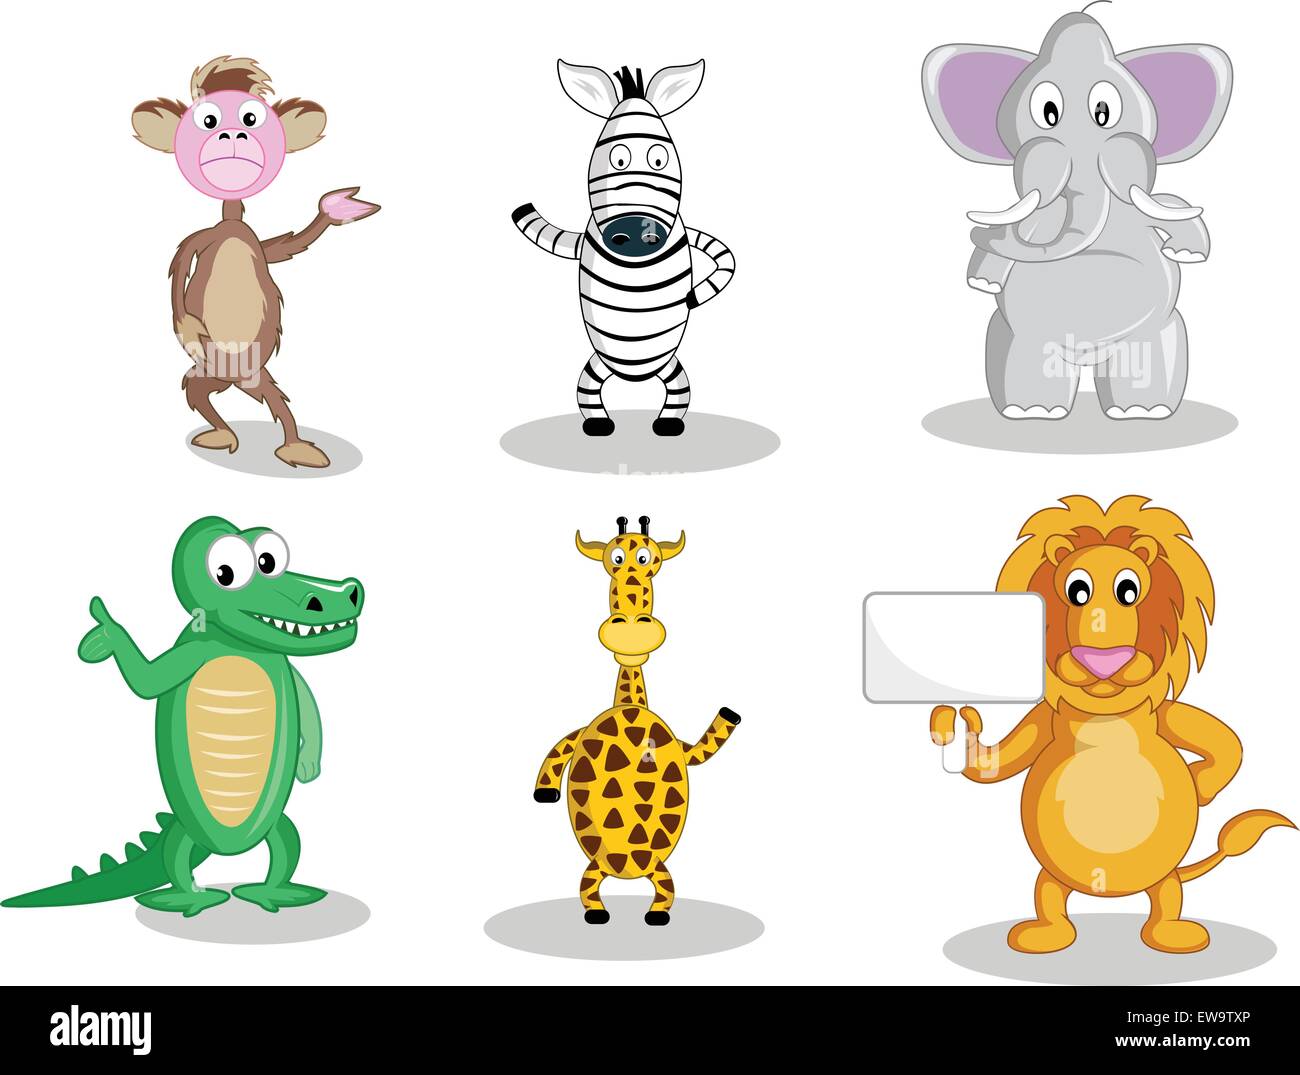 A monkey and a zebra waving their hand, a fat elephant, smiling intelligent gator, waving giraffe and a lion holding a sign, all in vector illustration cartoon. Stock Vector